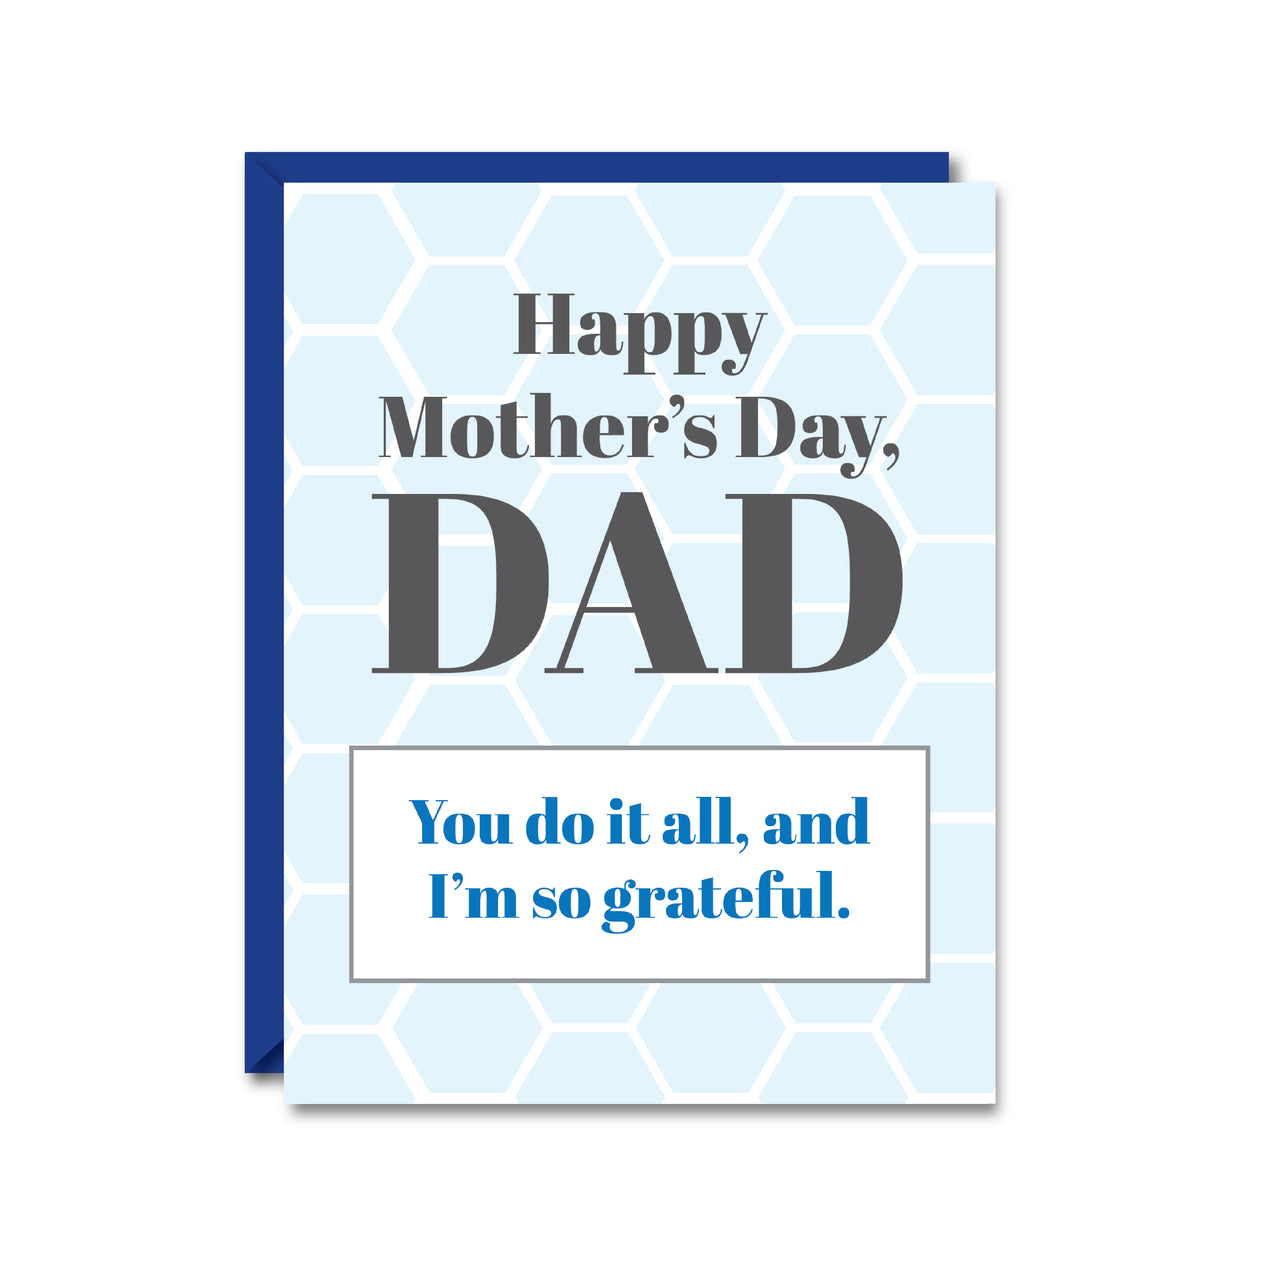 Mothers Day DAD Card